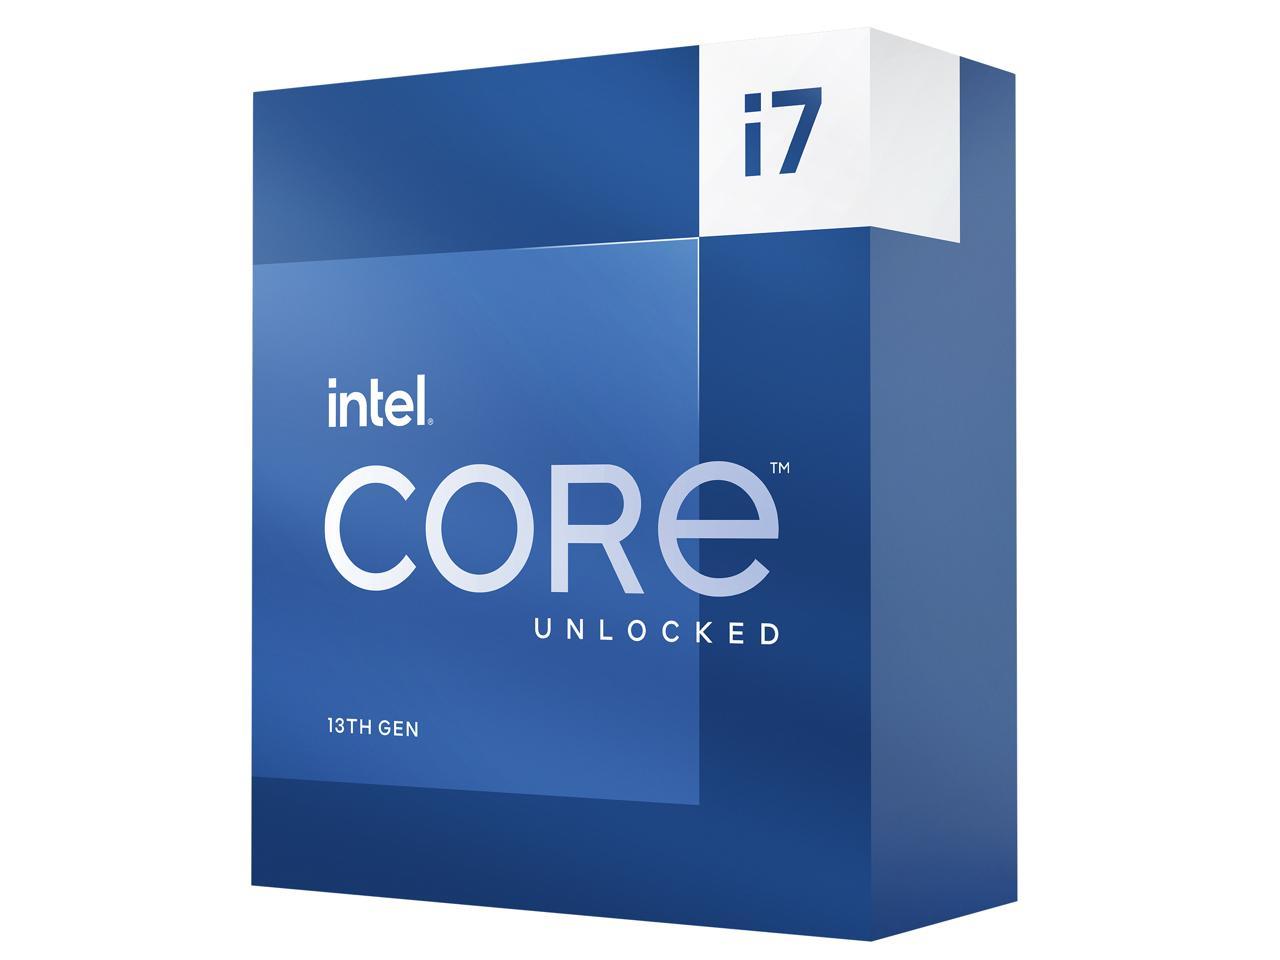  <B>Intel 13th Gen. LGA1700 CPU: Raptor Lake i7-13700K</B><BR>16-Cores (8P-Cores/8E-Cores) 24-Threads, 5.4GHz (Turbo) 30MB Cache, 253W<BR>Intel UHD Graphics 770, No CPU Cooler Included  